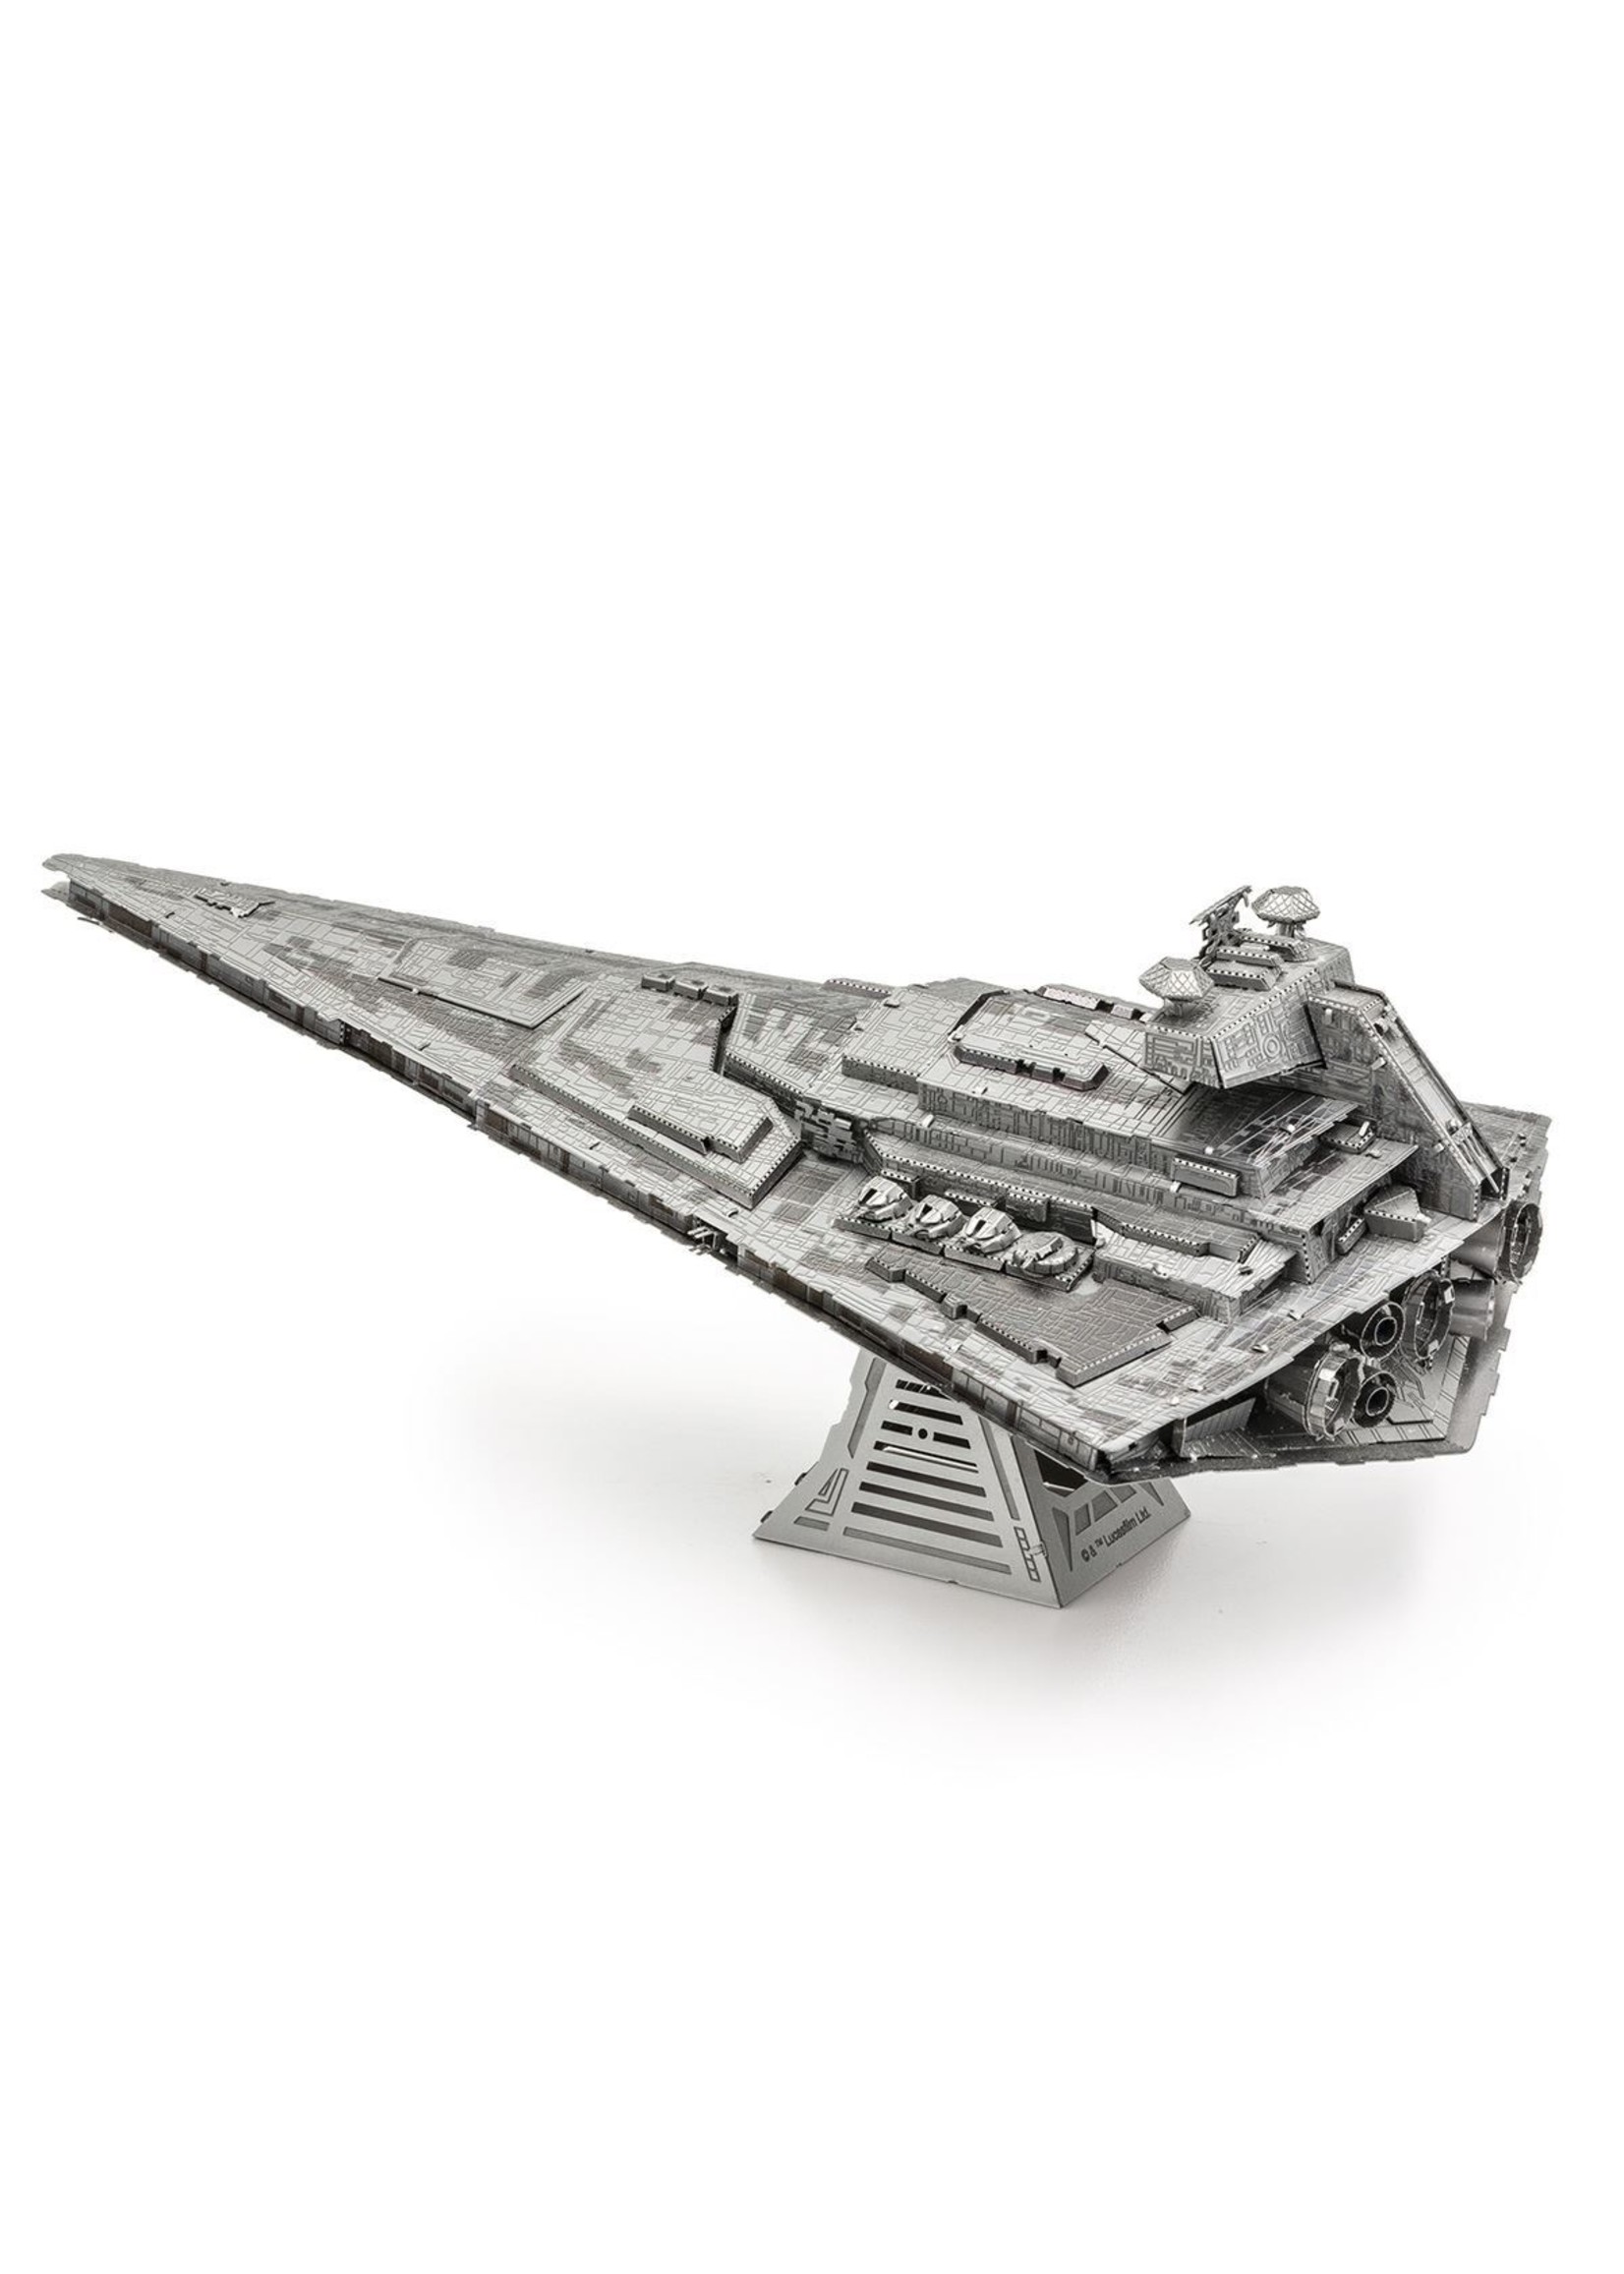 Fascinations Metal Earth - Star Wars Imperial Star Destroyer ICX